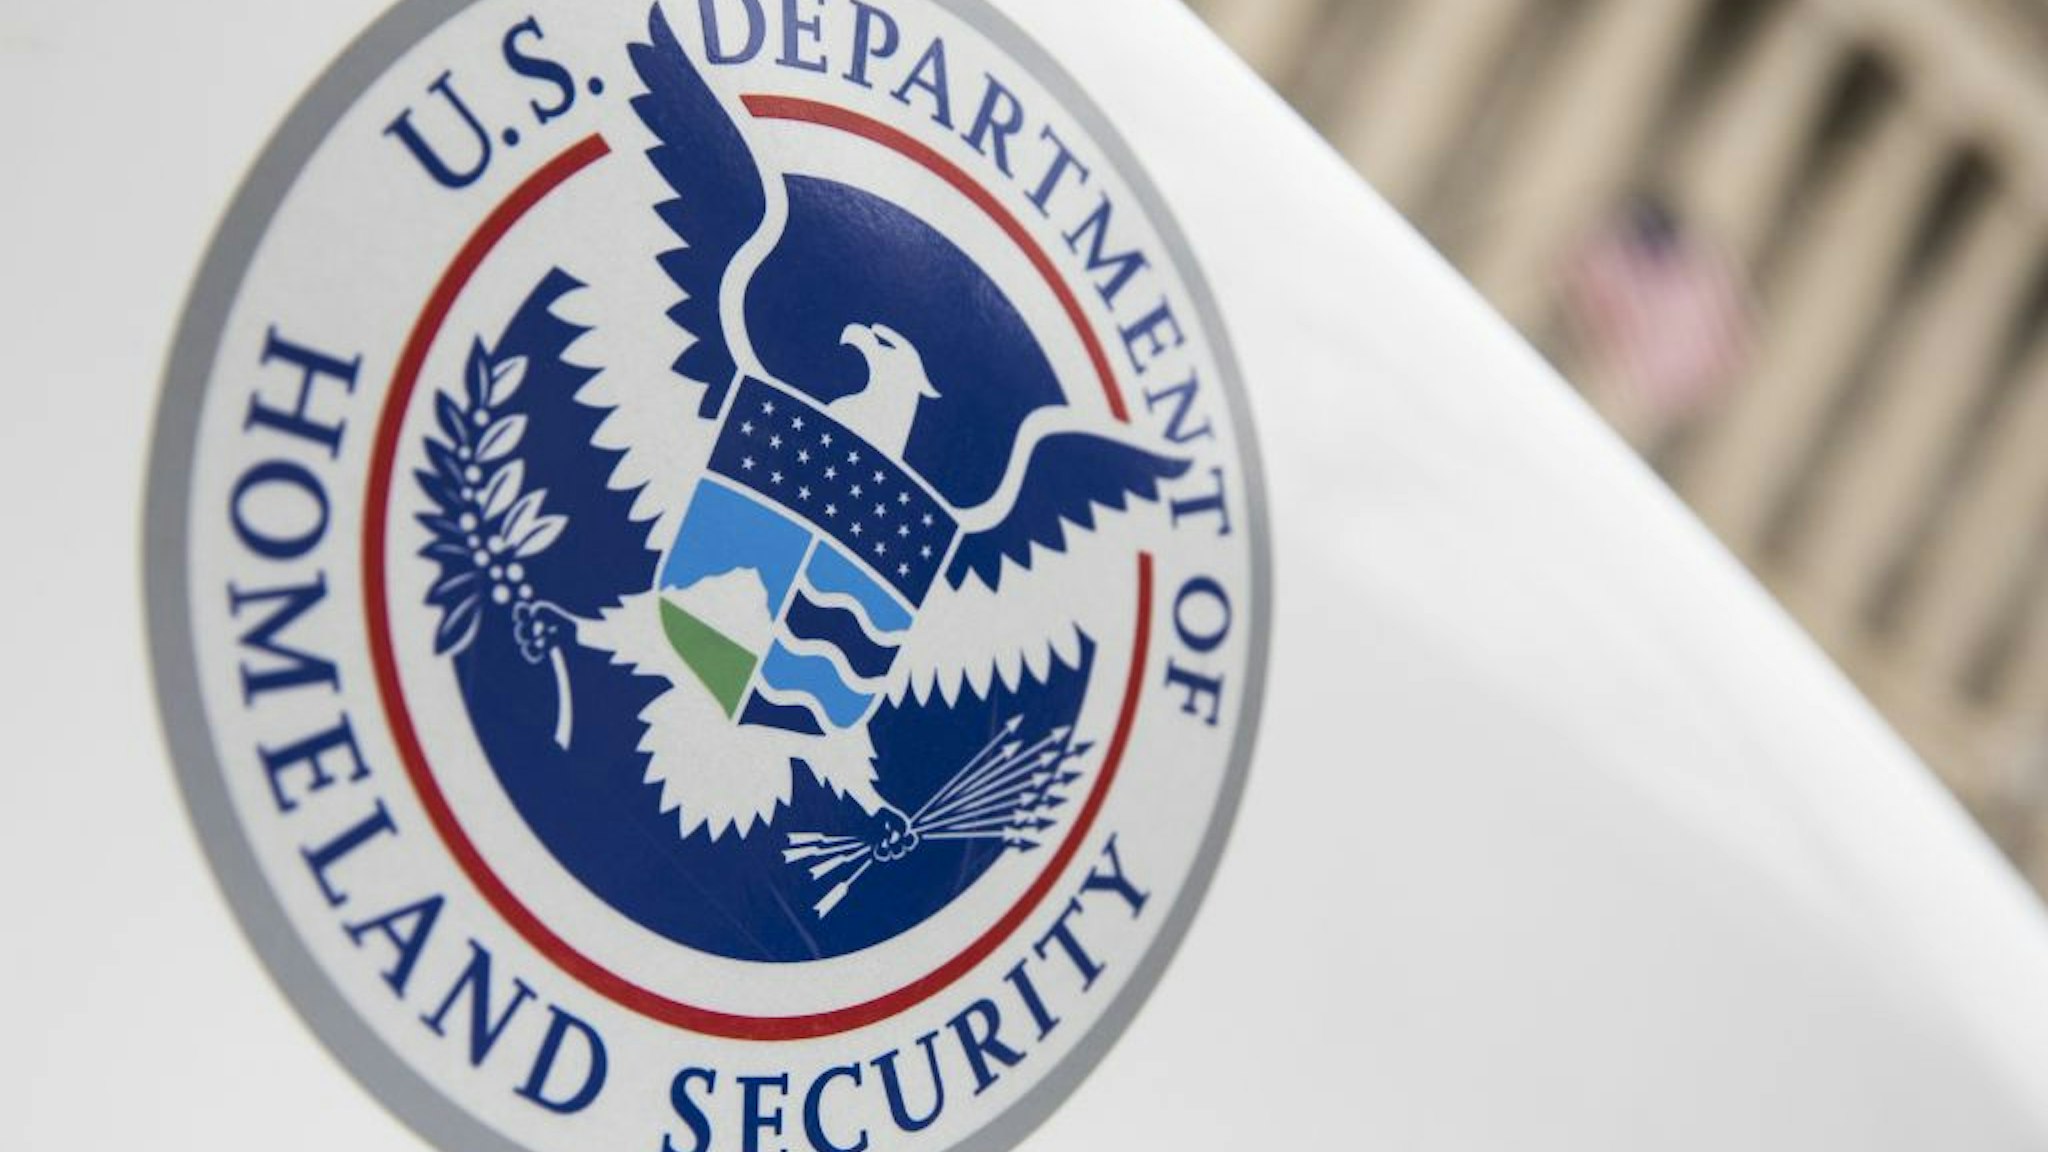 The Department of Homeland Security logo is seen on a law enforcement vehicle in Washington, United States on March 7, 2017.